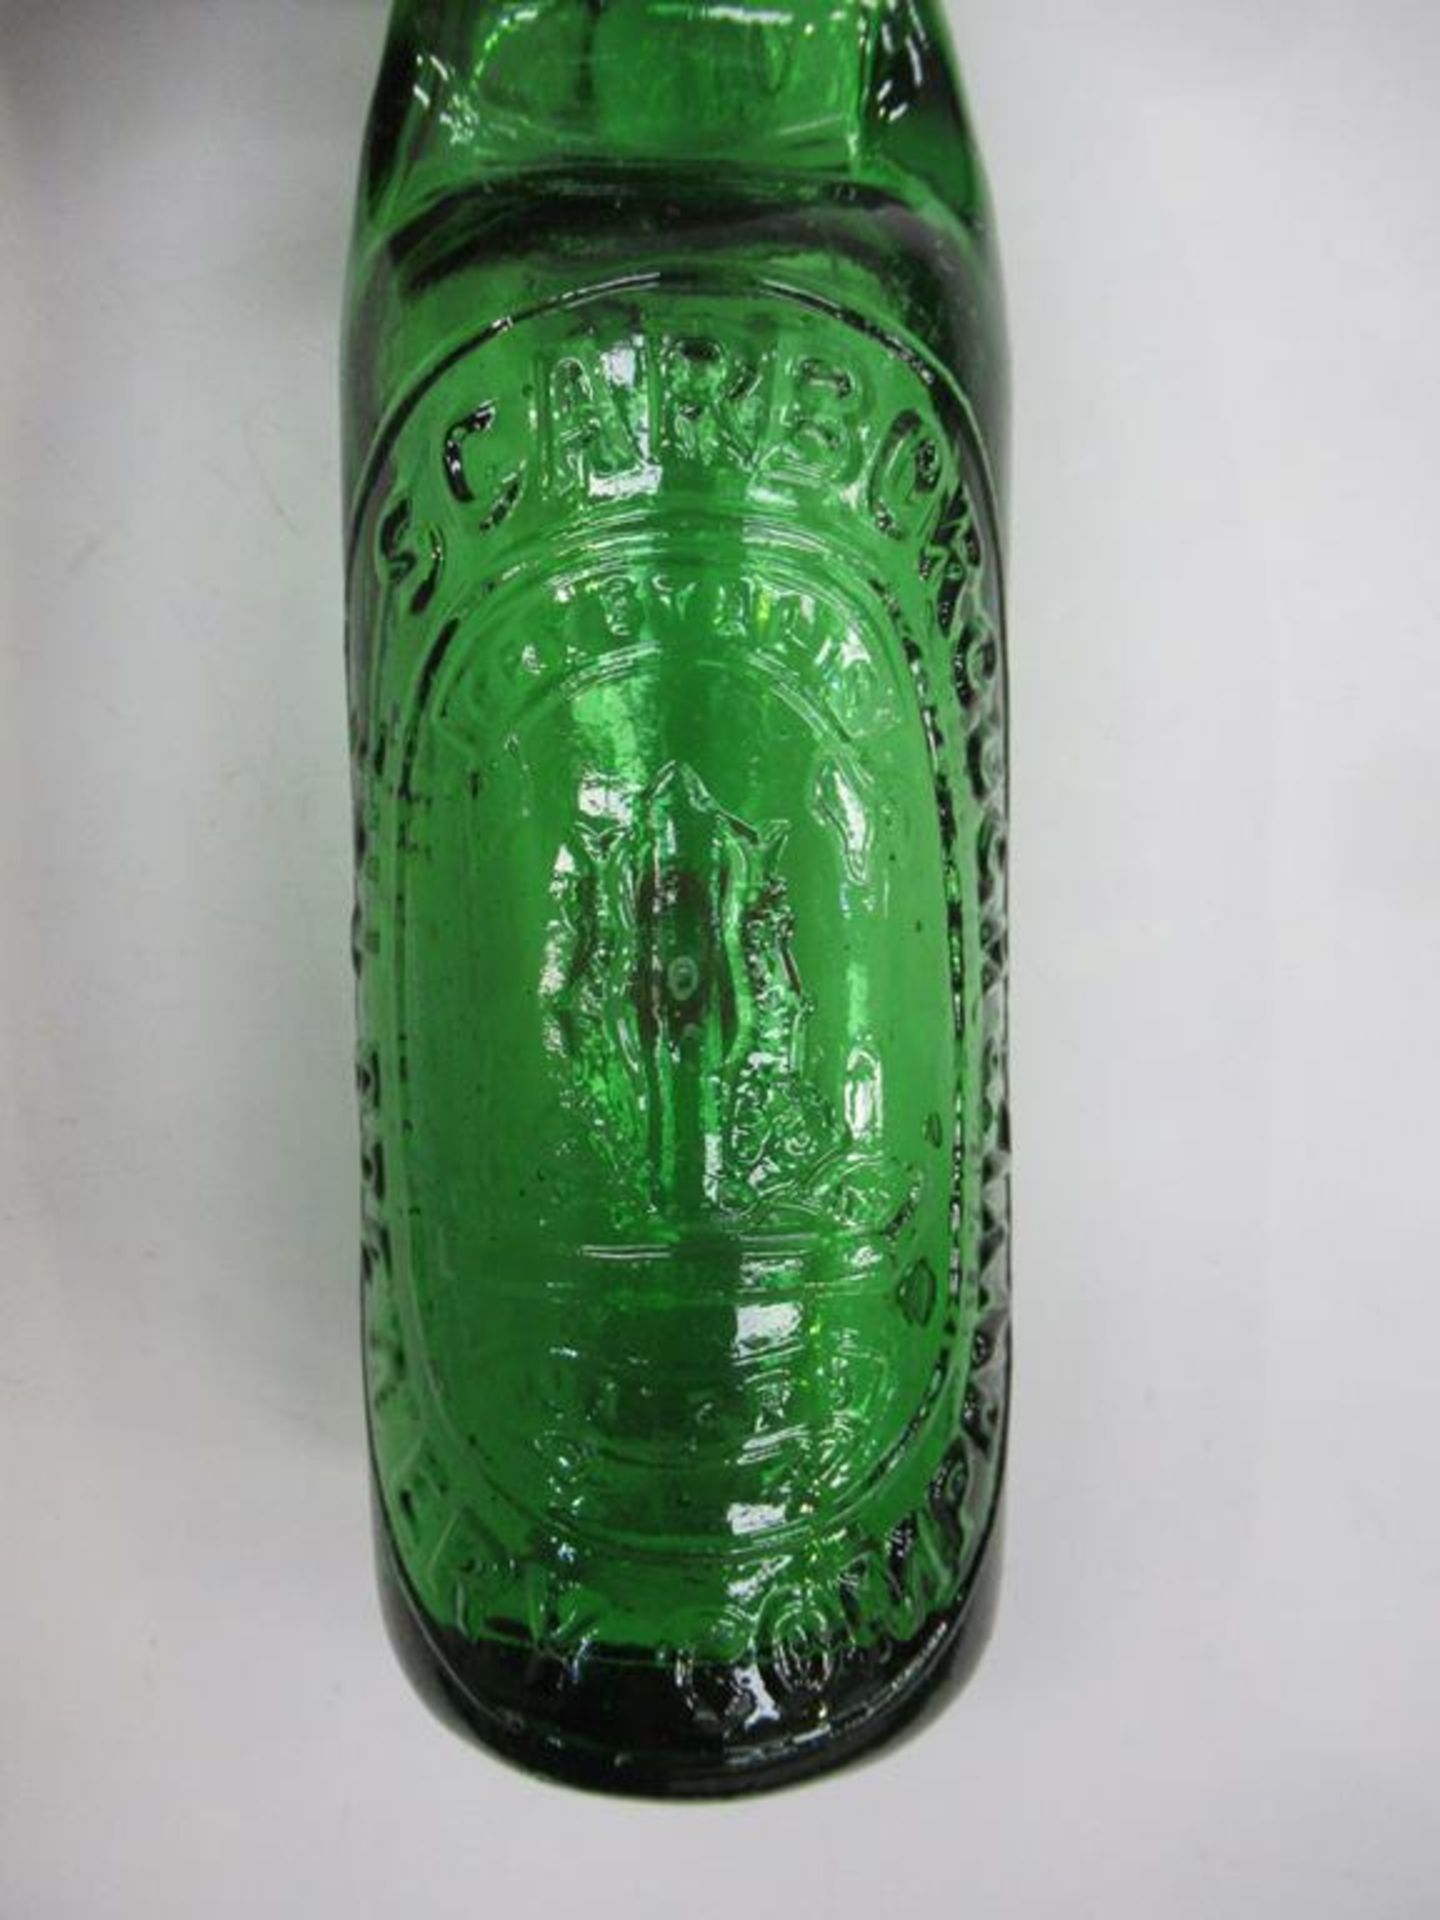 The Scarborough Brewery Co. Ltd coloured codd bottle 10oz - Image 6 of 6